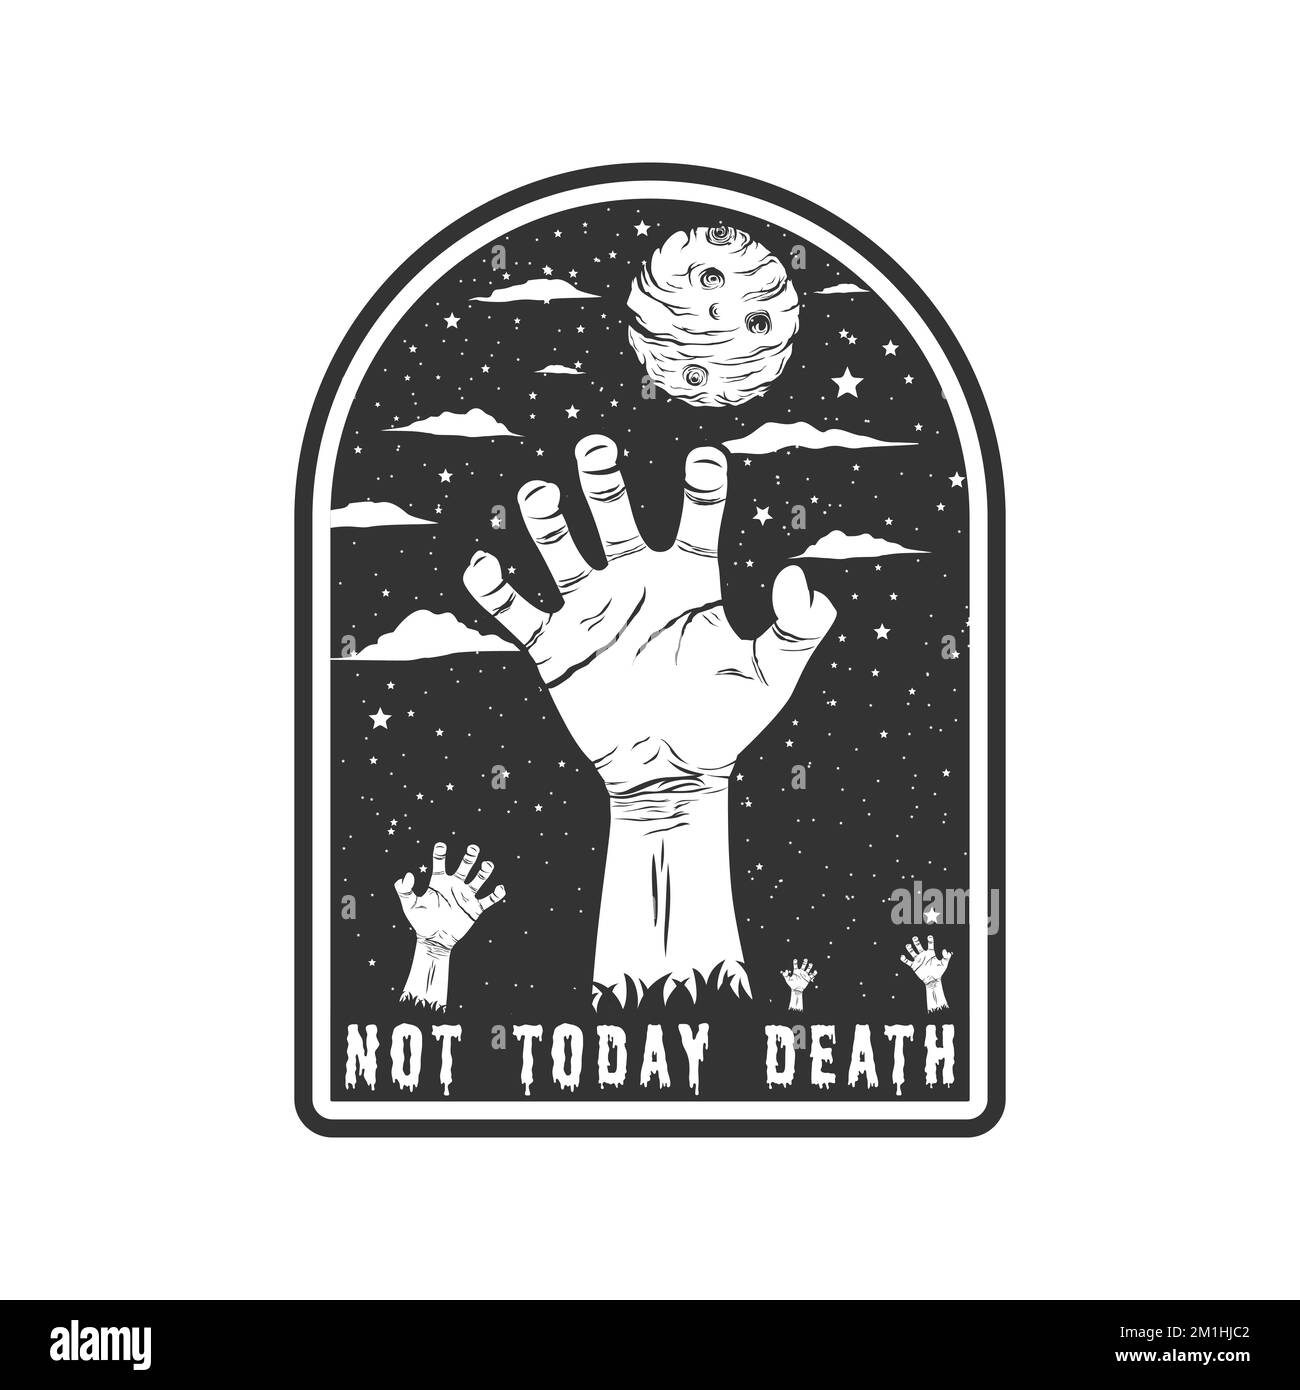 Not Today Death, Skull and Zombie Typography Quote Design. Stock Vector